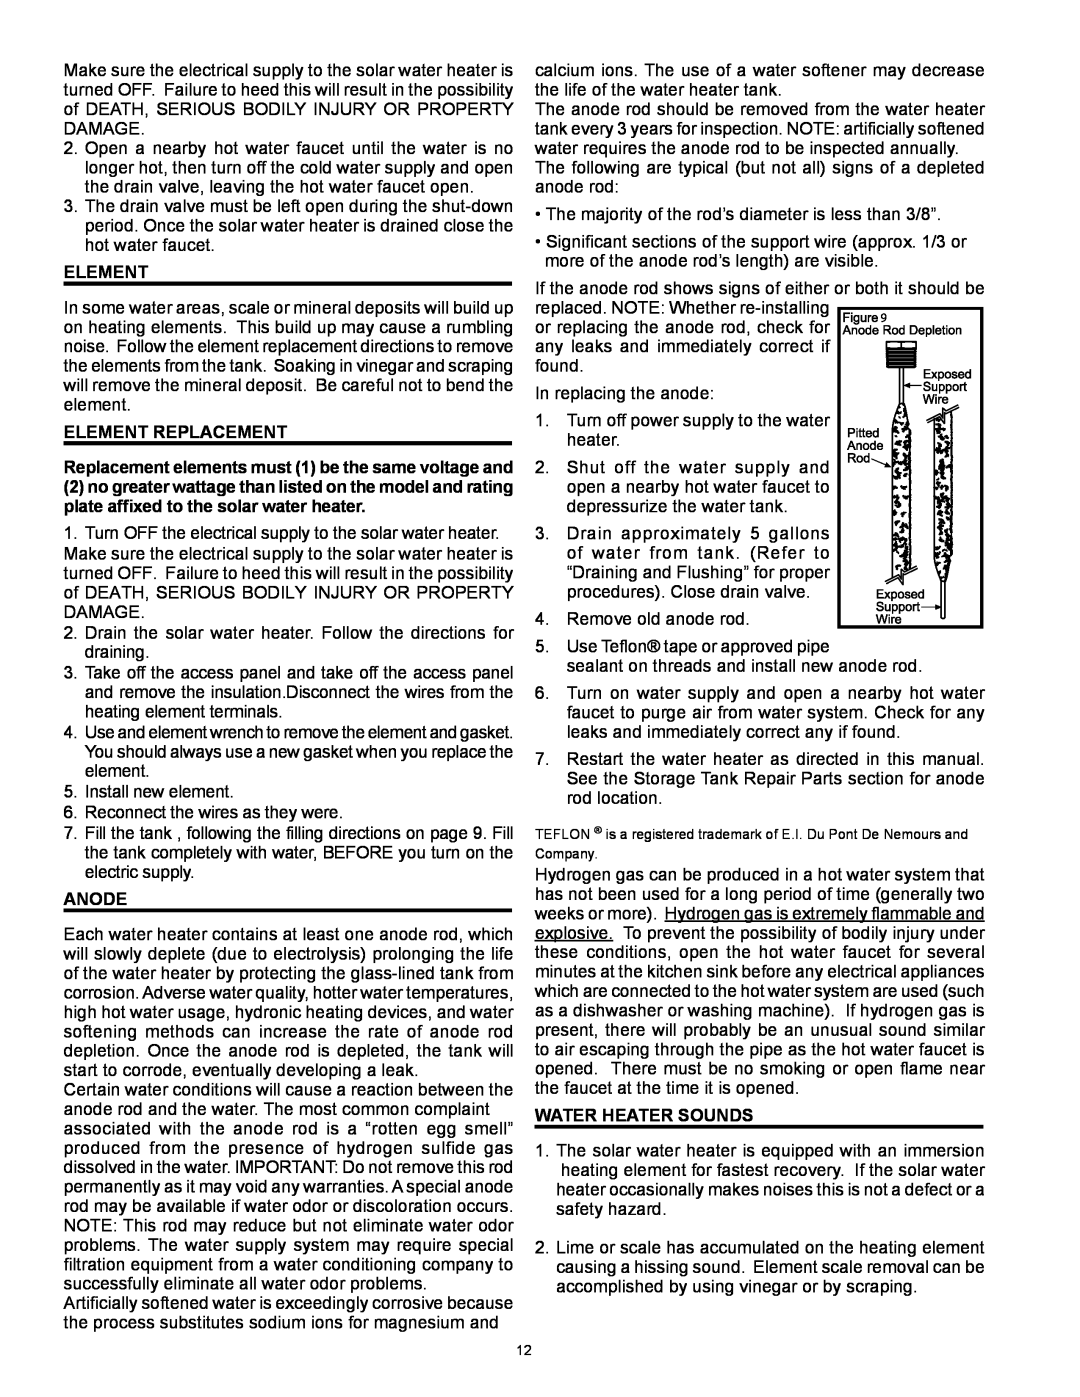 American Water Heater 318281-000 instruction manual Element Replacement, Anode, Water Heater Sounds 